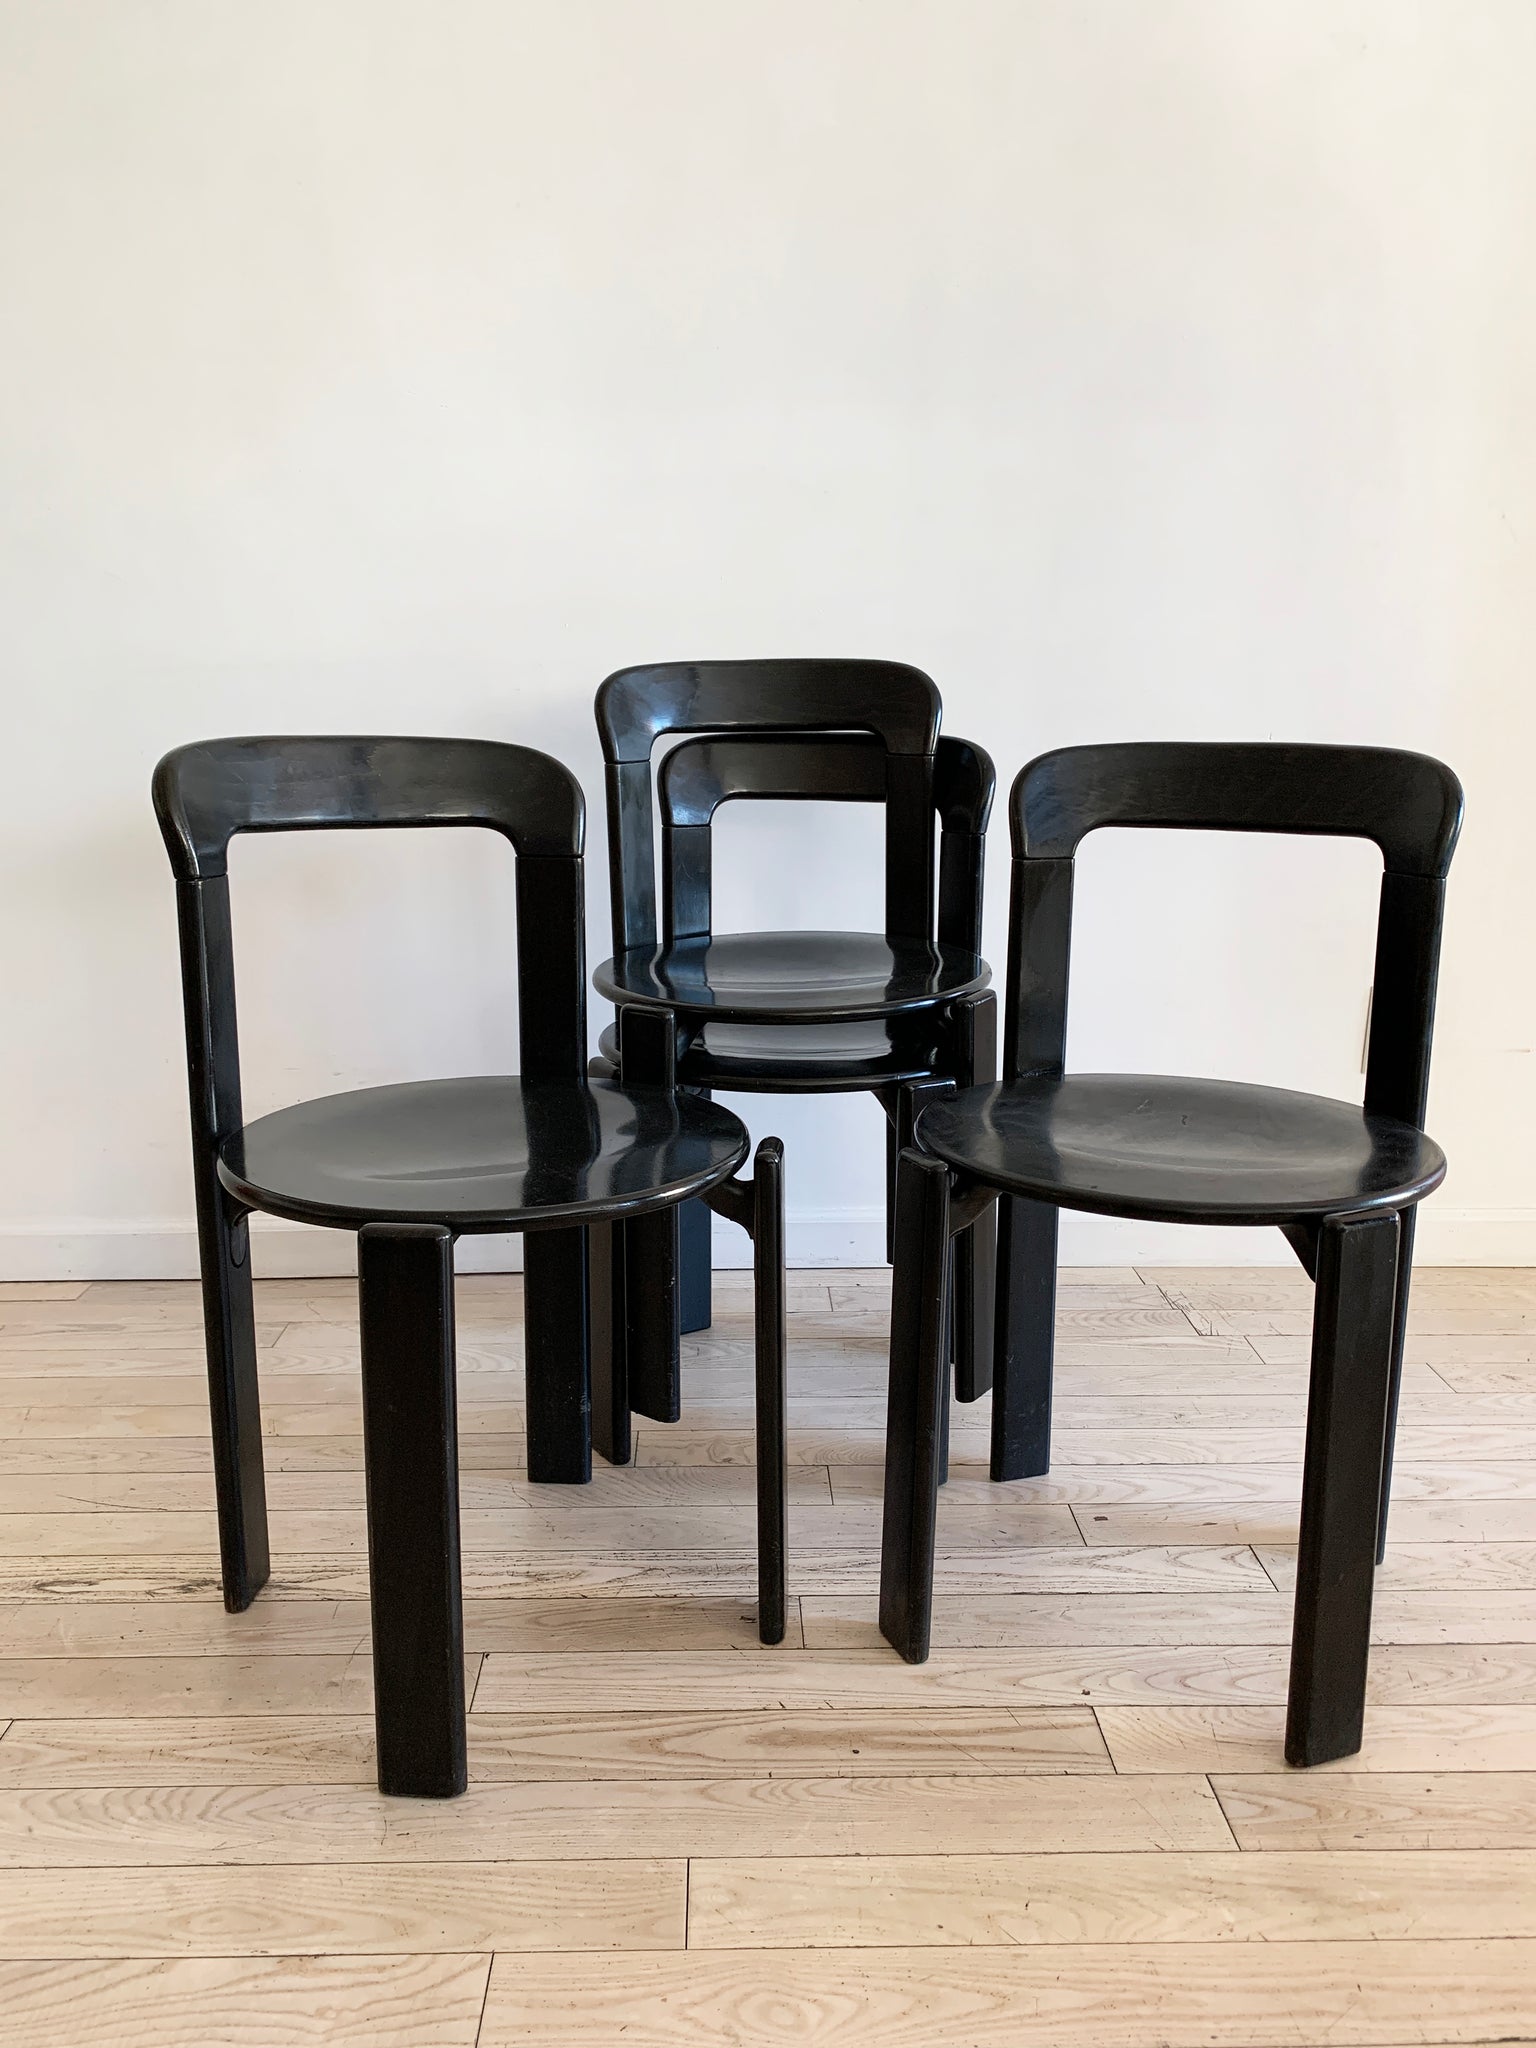 1970s Black Stained Rey Stacking Chairs by Bruno Rey - Set of 4